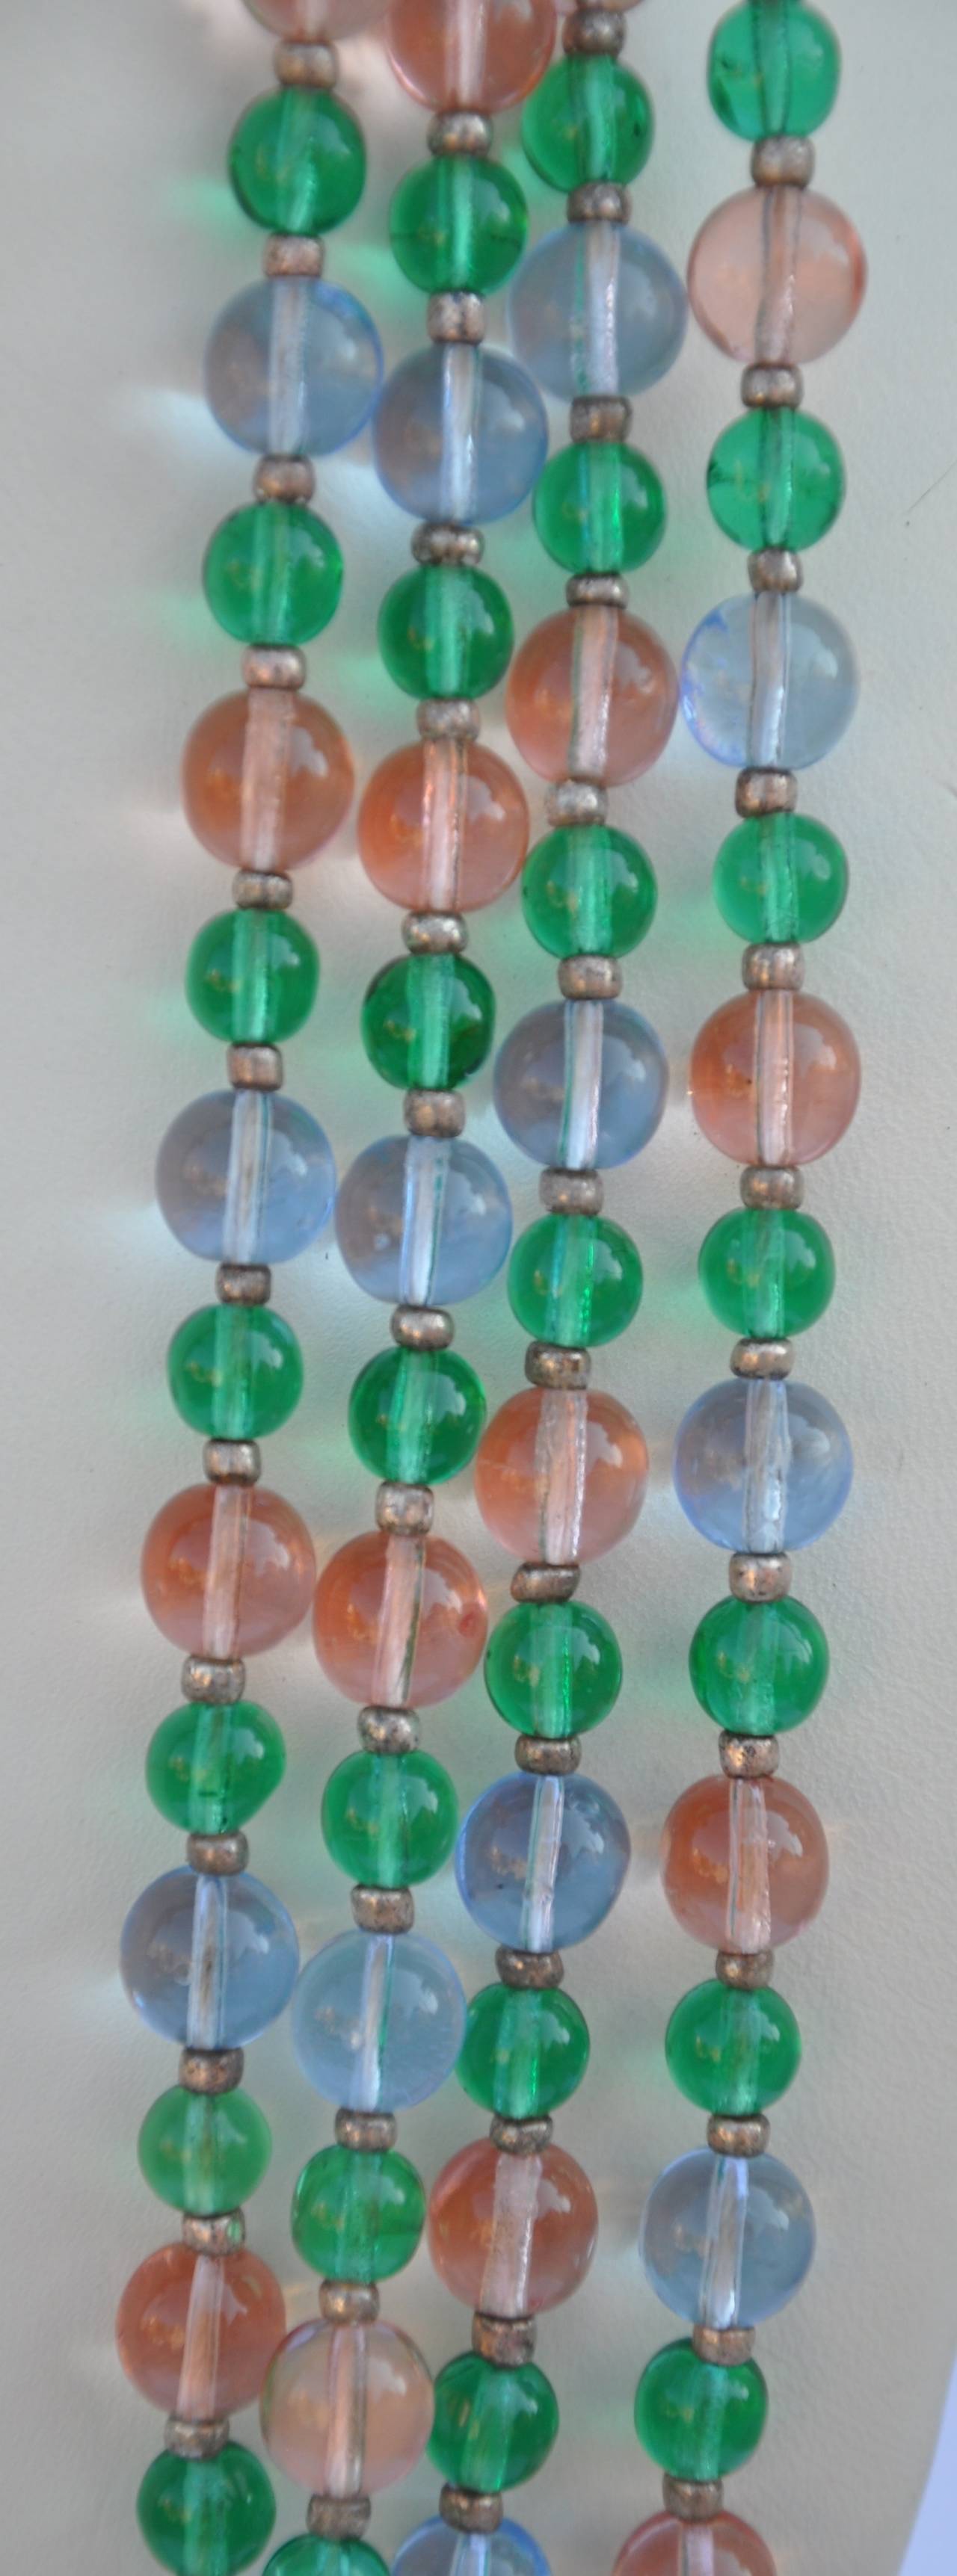 This wonderfully multi-color pair of necklaces with glass beads made in West Germany measures 60" in length. The thicken of the beads range up to 1/4" with multiple colors of greens, pinks and clear. Both pair of necklaces measures the